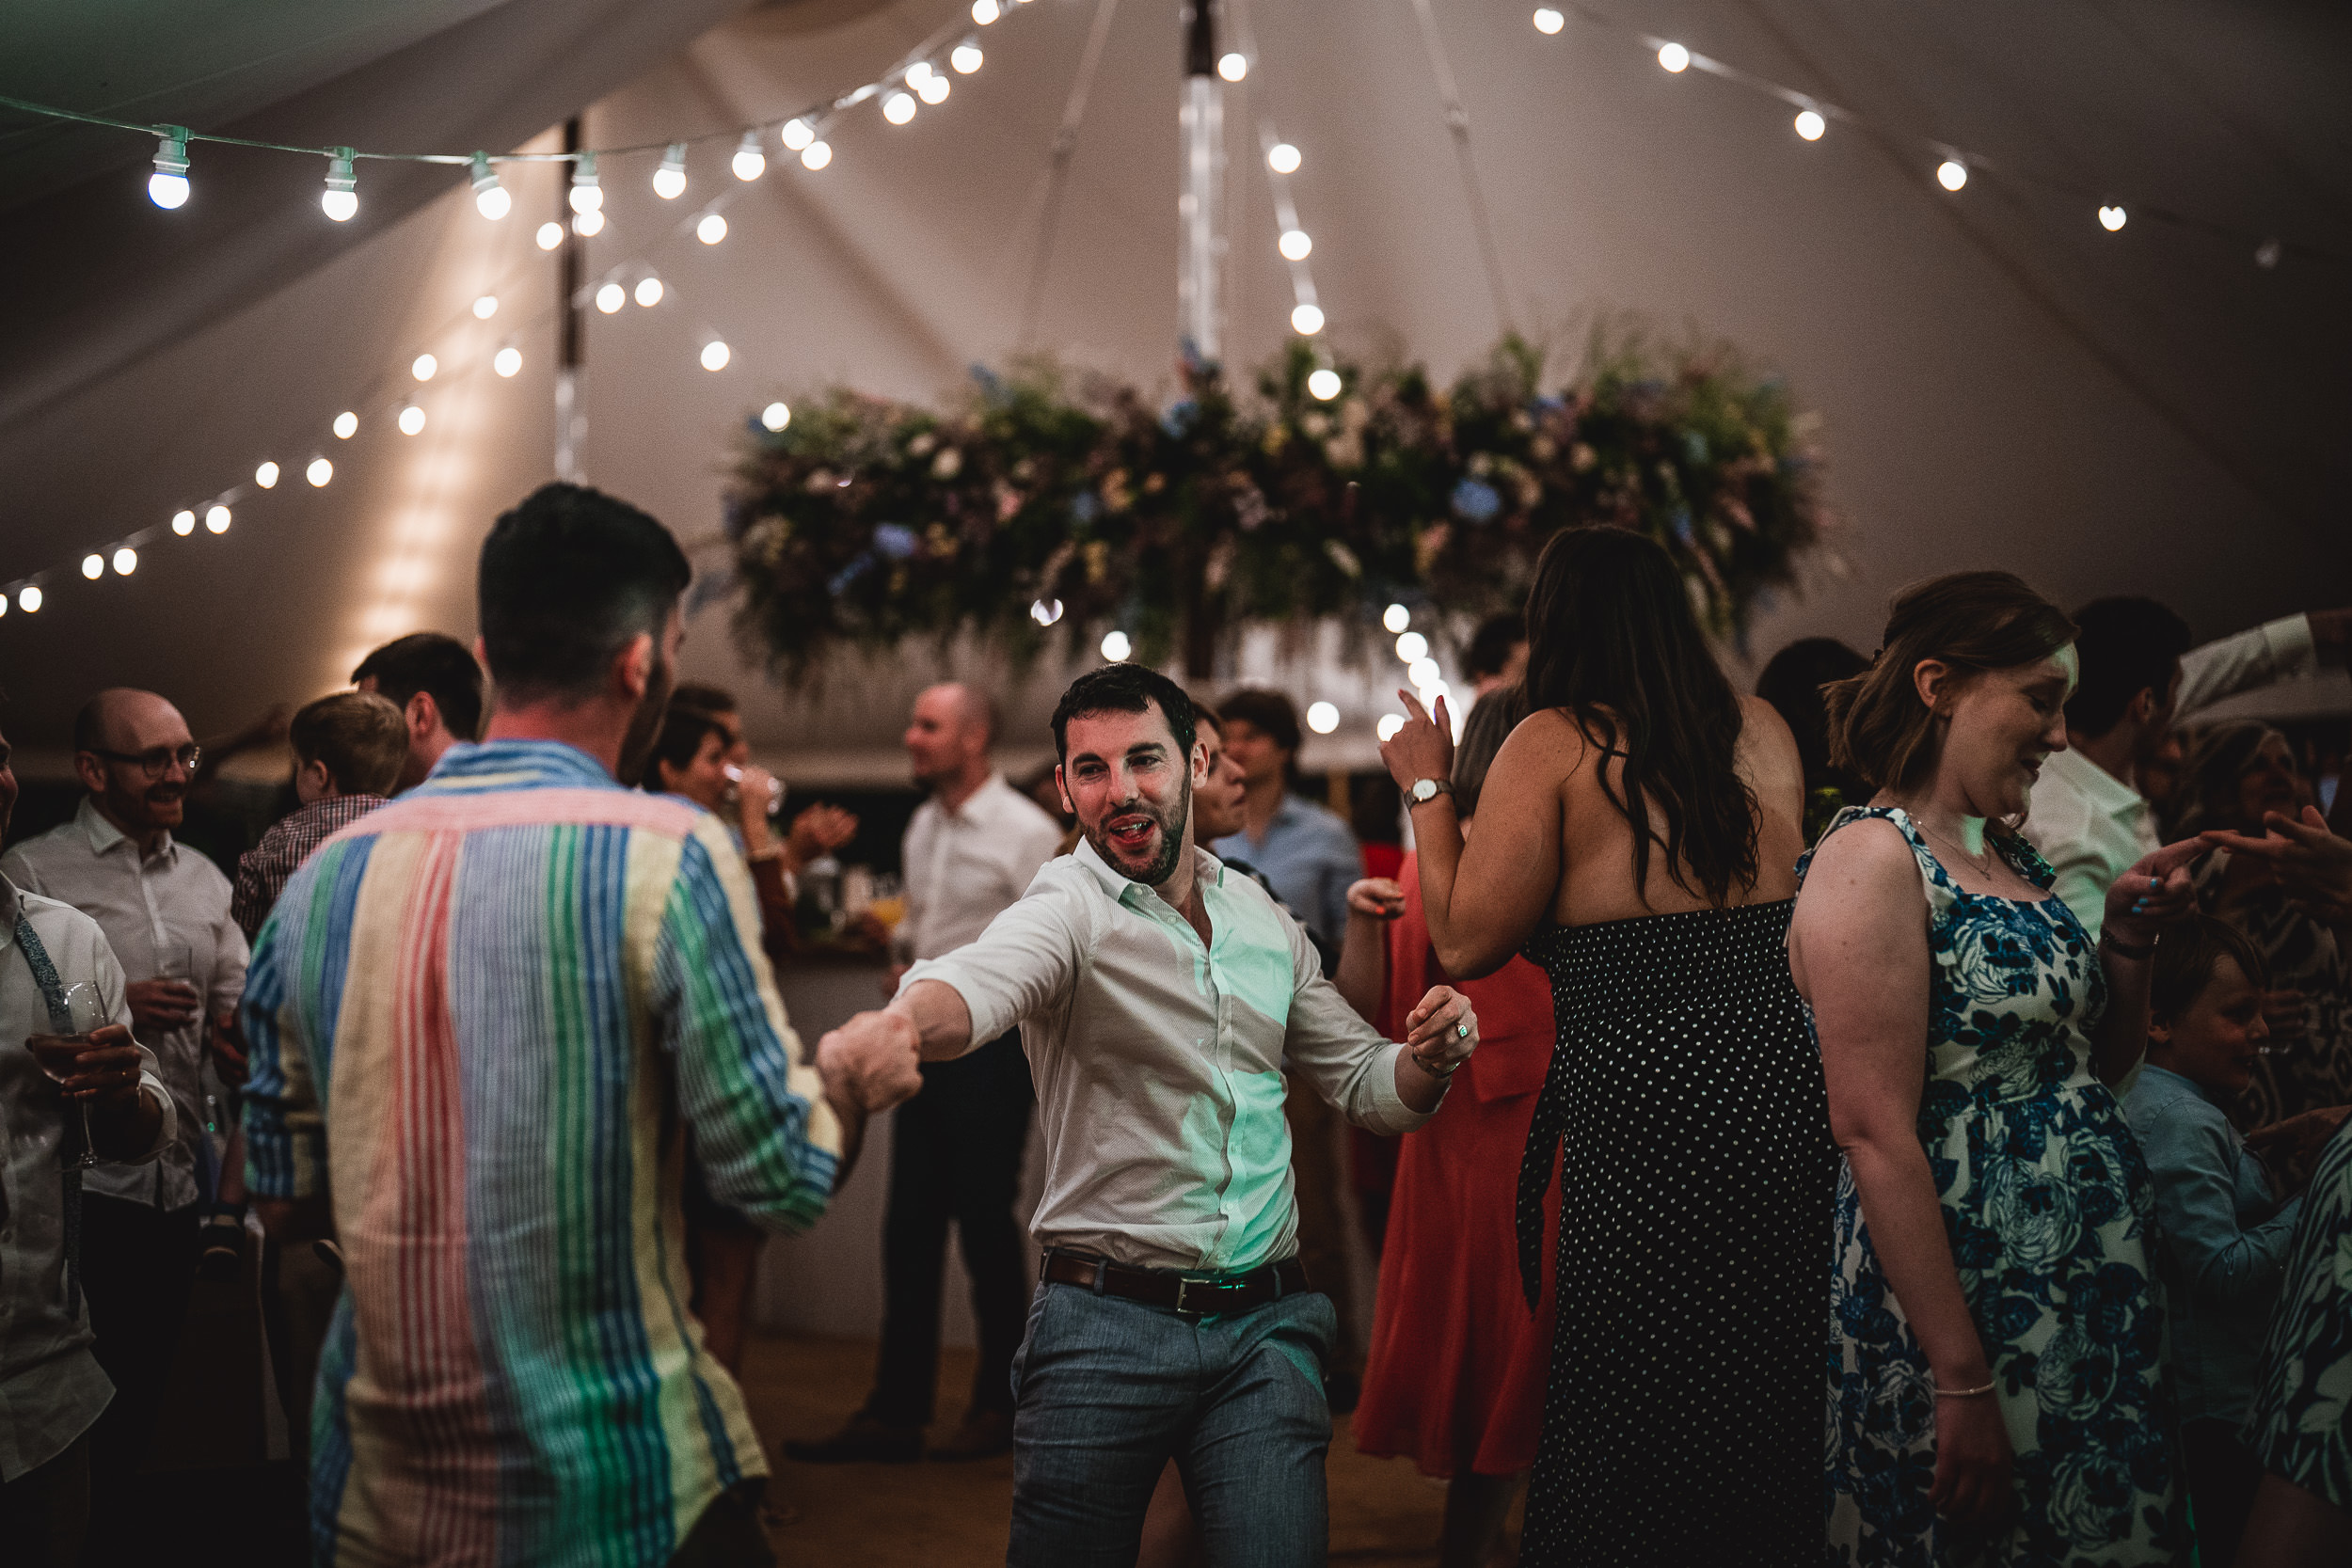 A group of people dancing at a wedding.